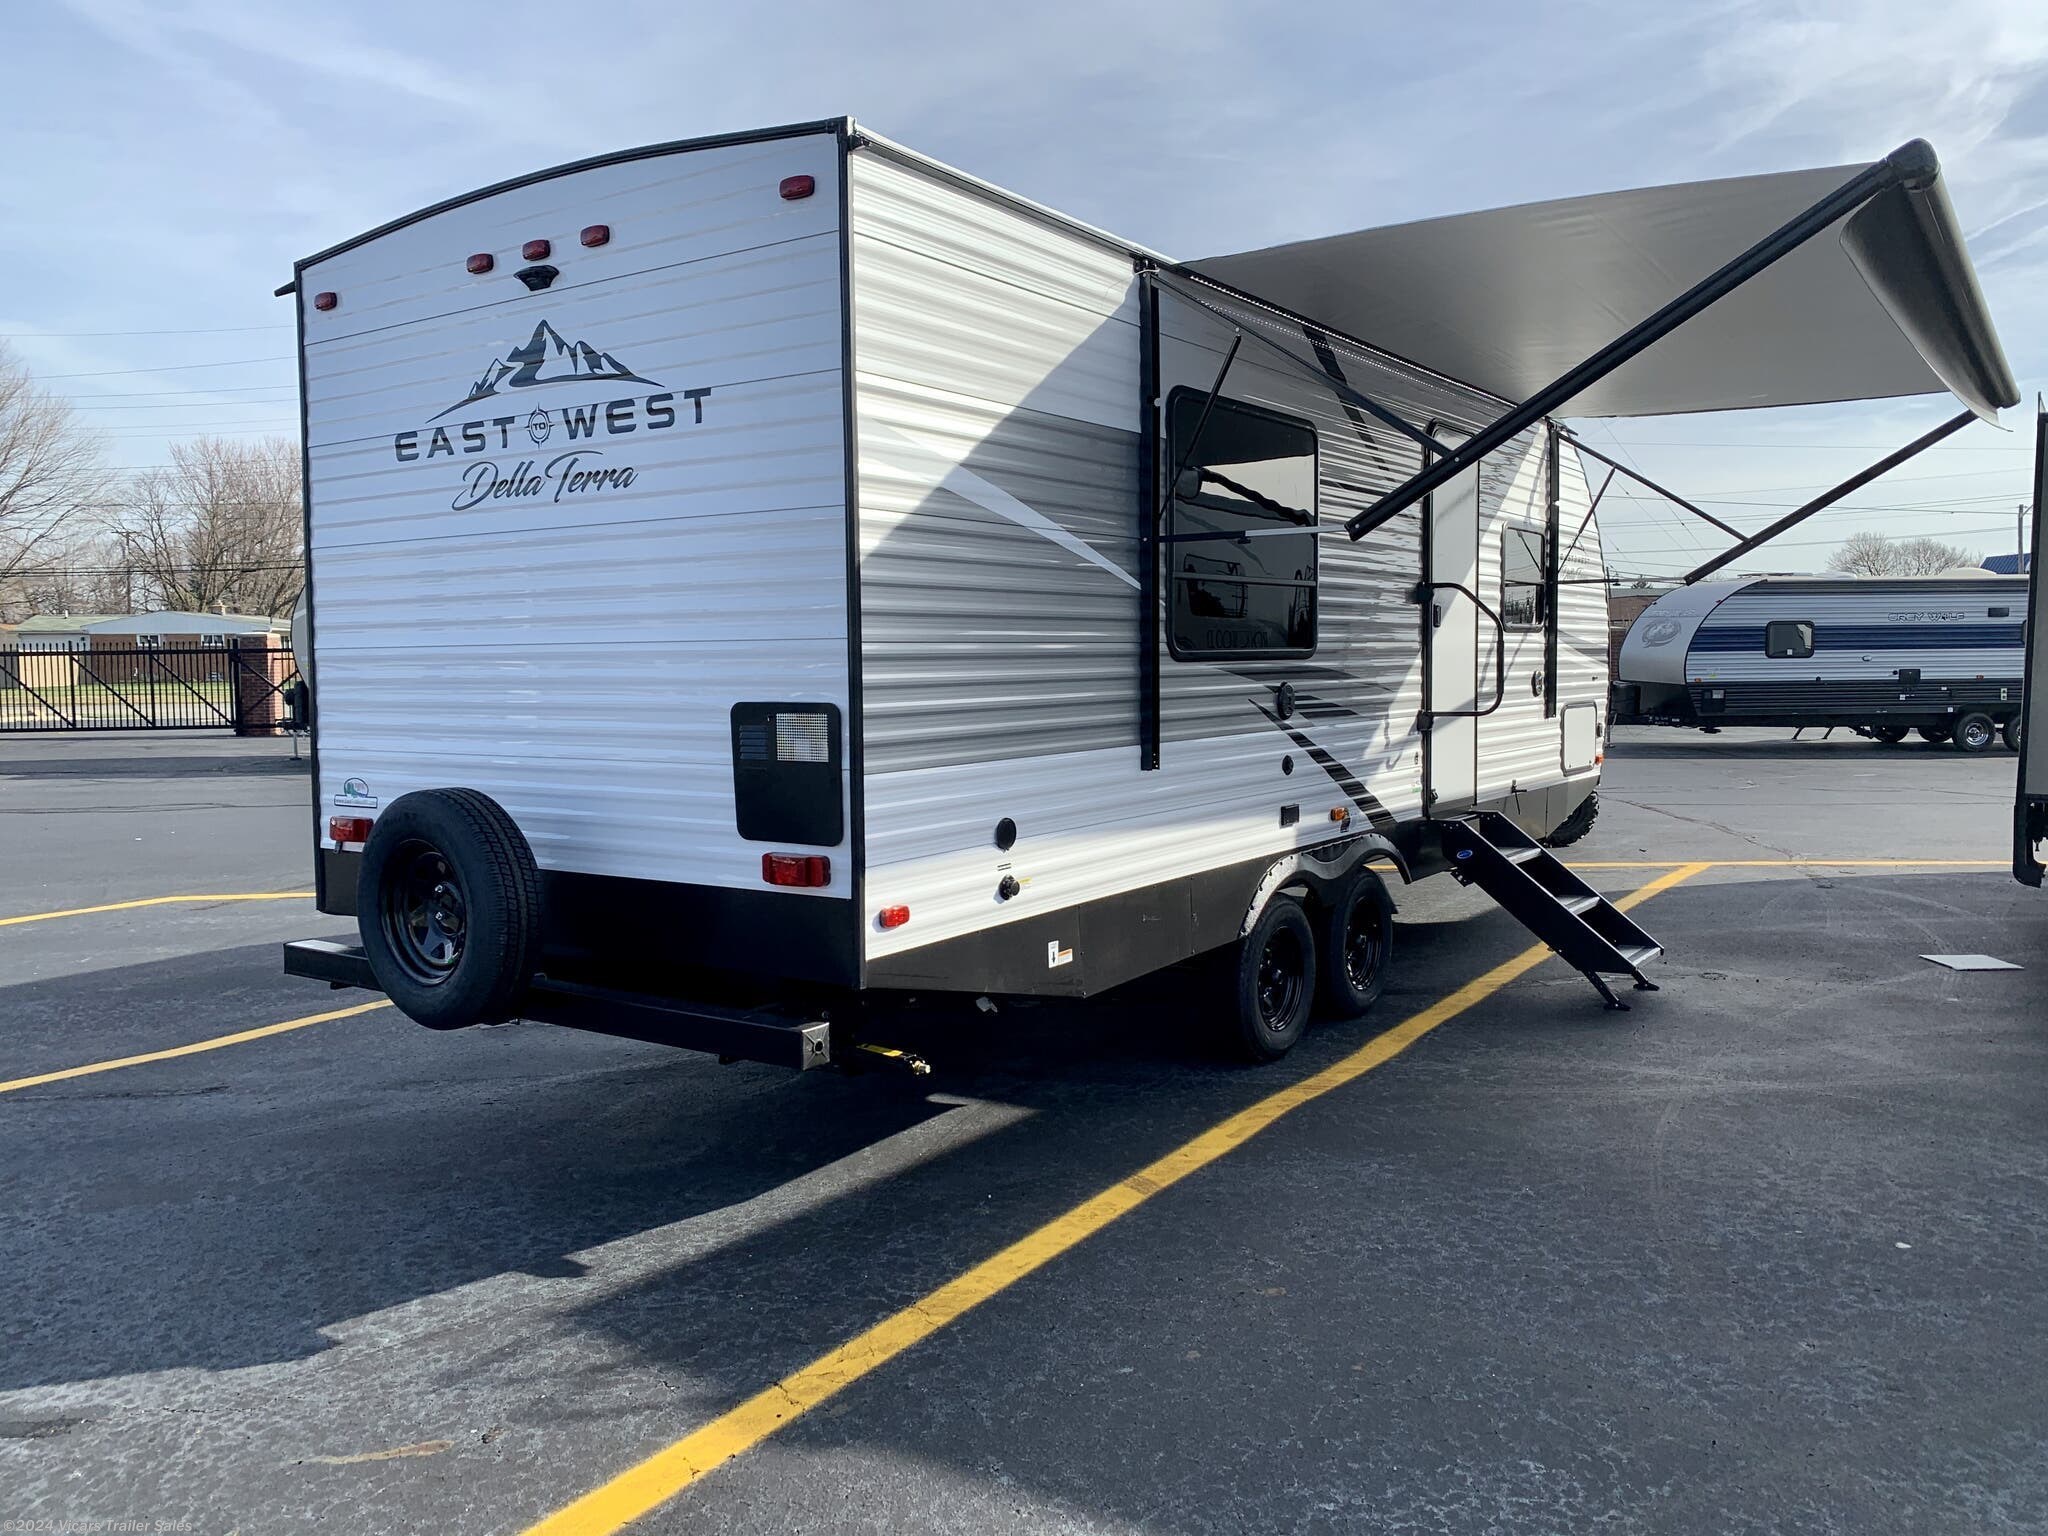 2021 East to West Della Terra 230RB RV for Sale in Taylor, MI 48180 | 06381 | RVUSA.com Classifieds 2021 East To West Della Terra 230rb